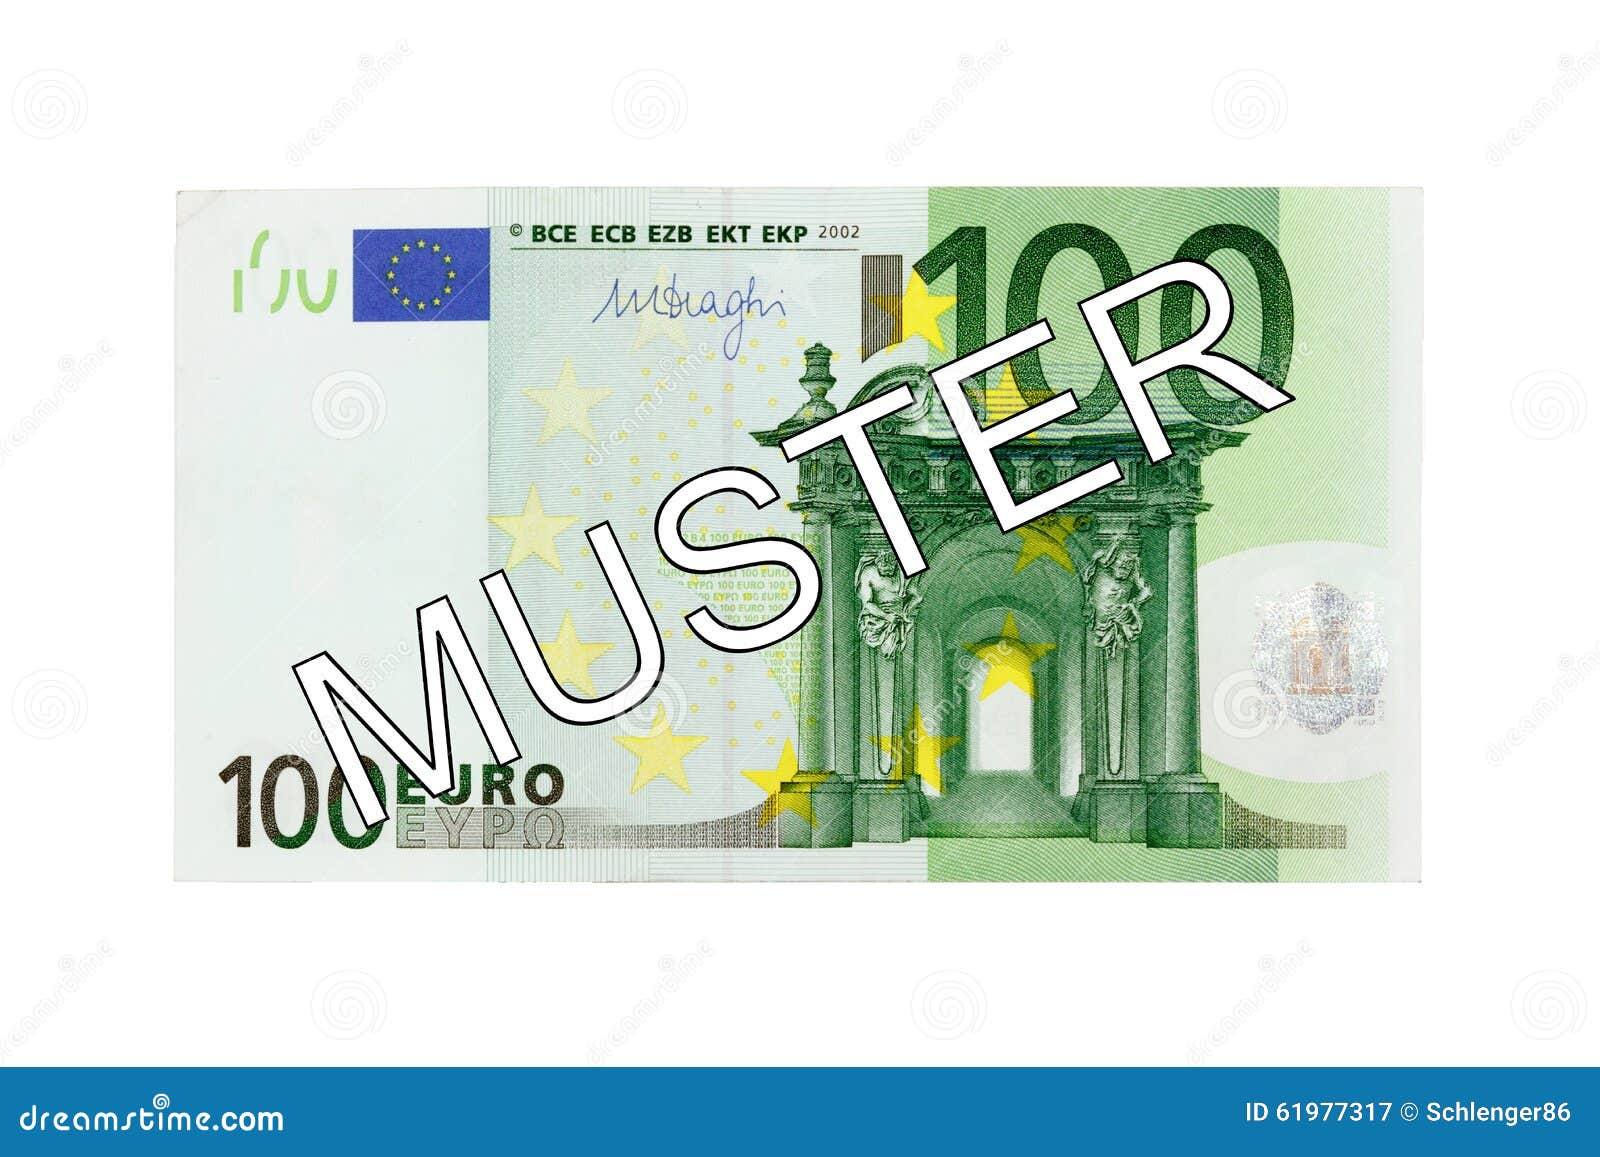 Money - One Hundred (100) Euro Bill Front With German ...